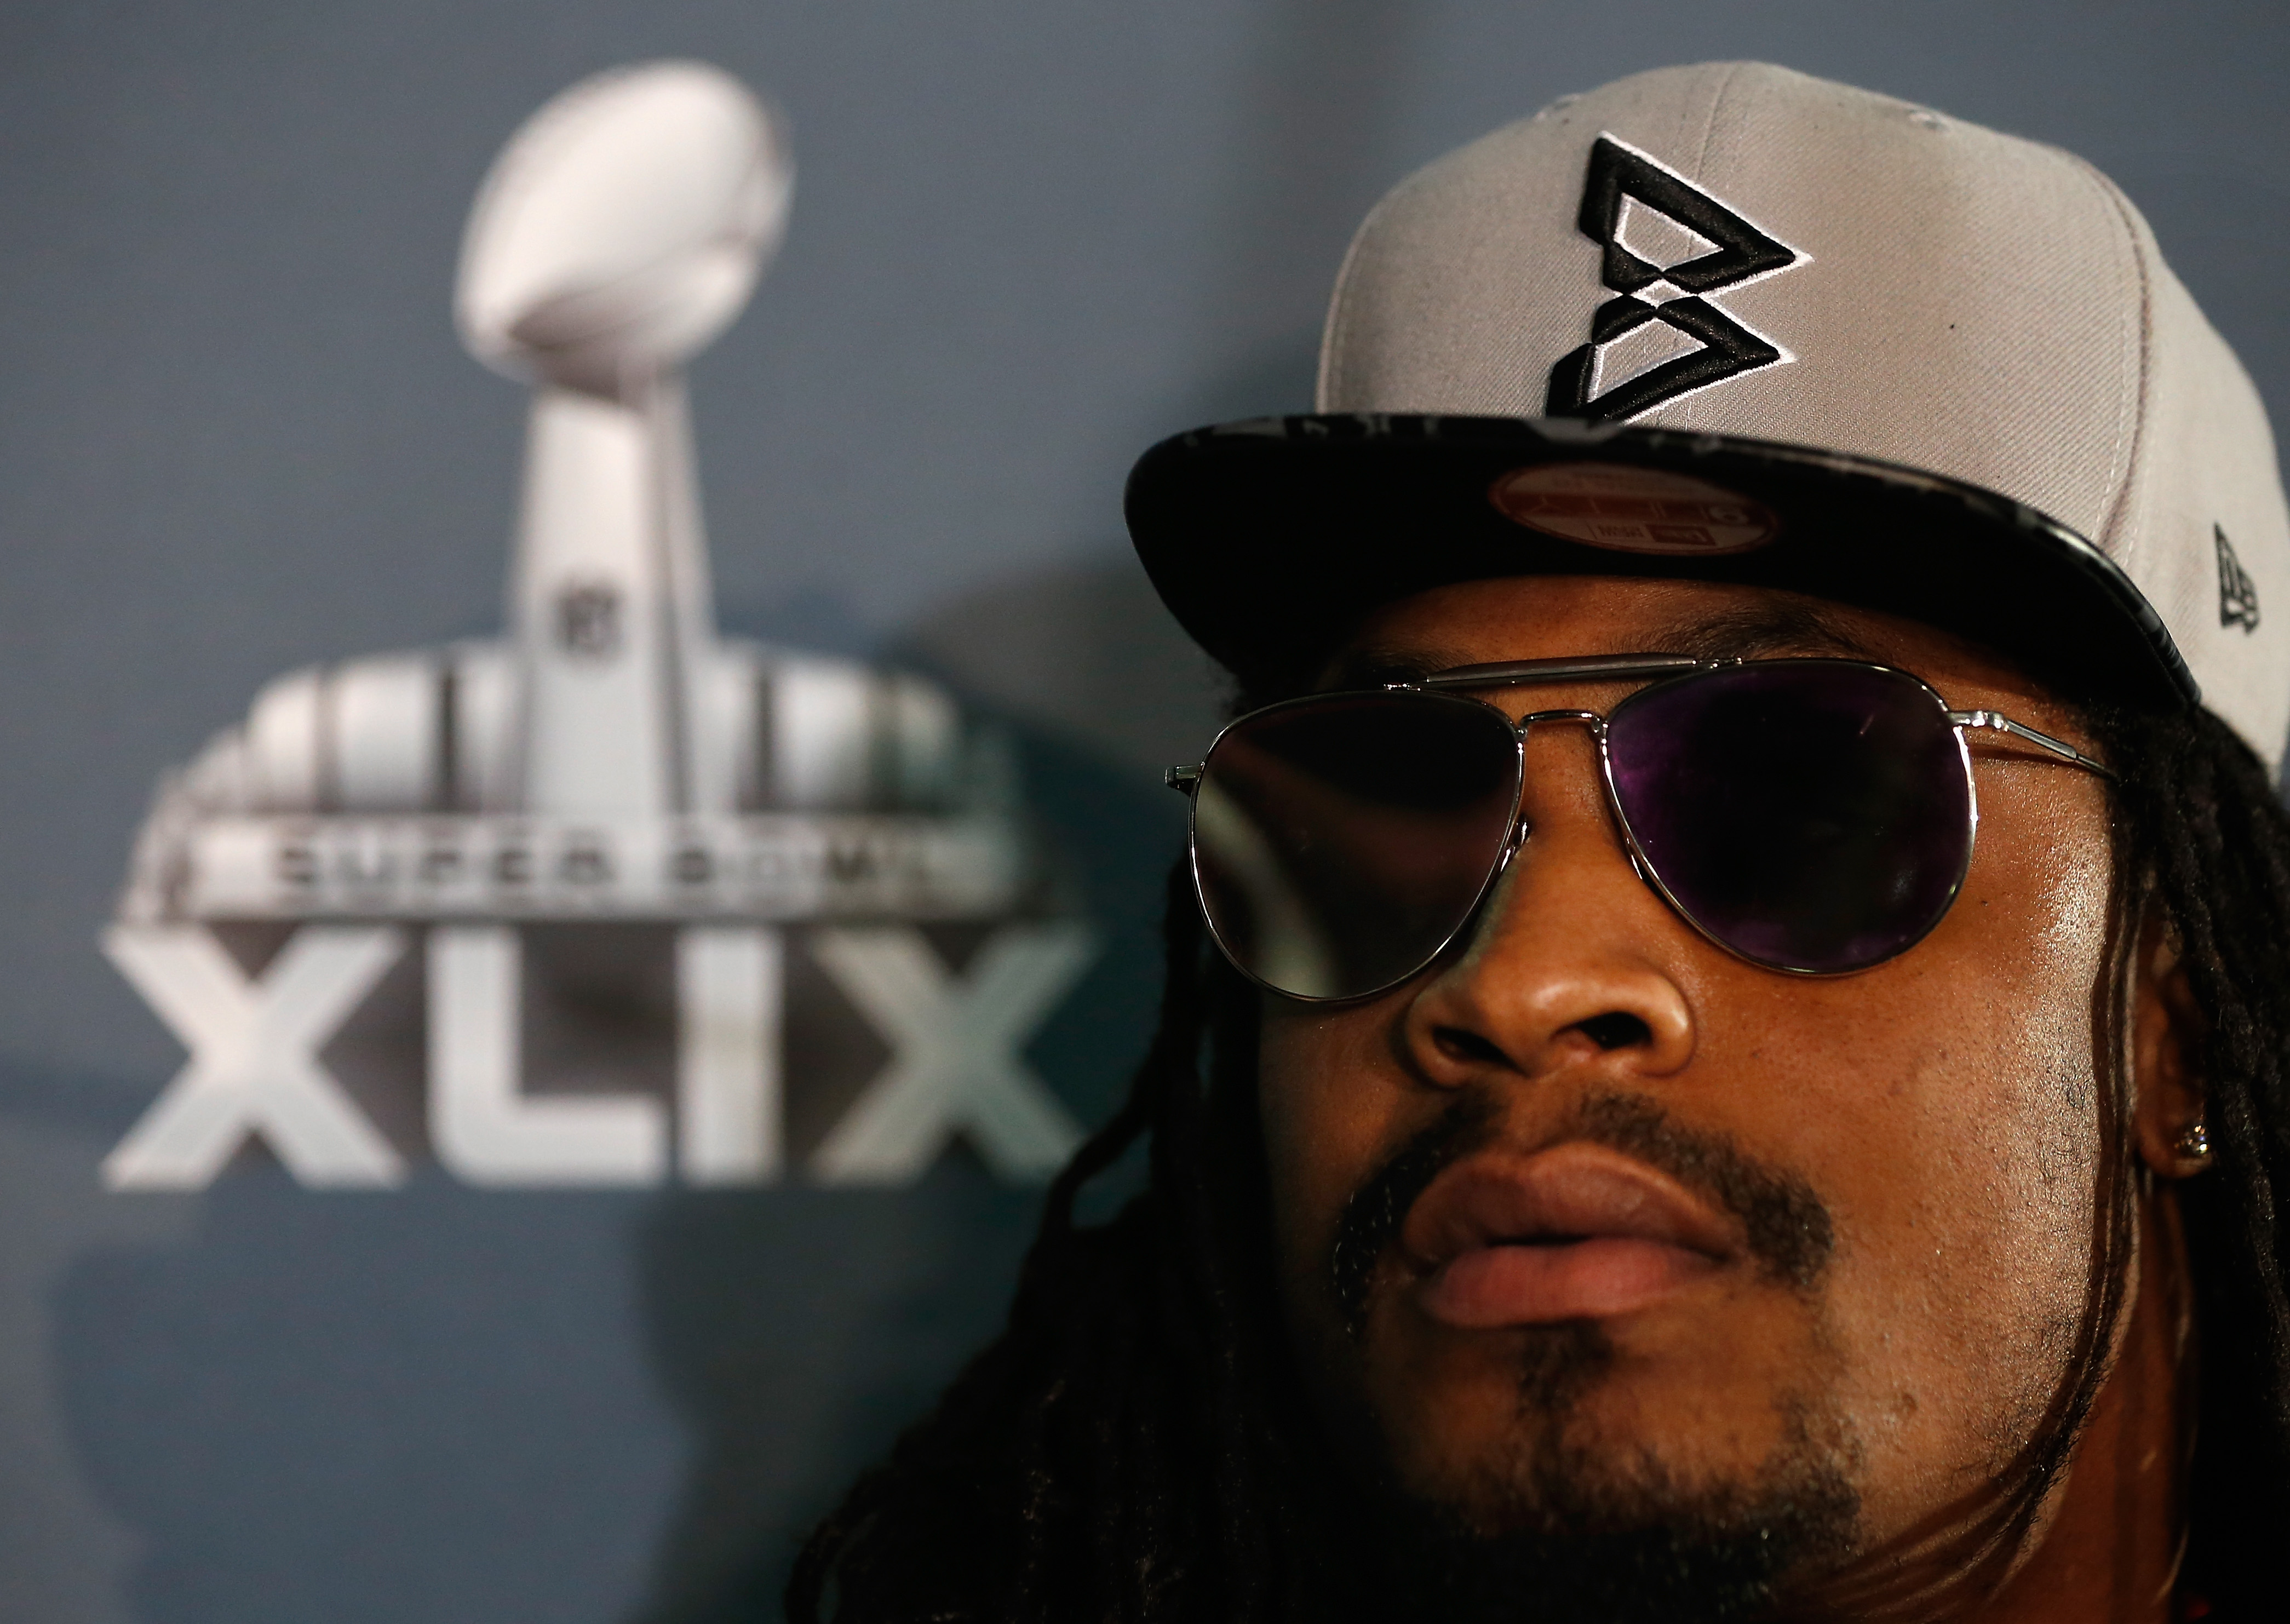 Seattle Seahawks running back Marshawn Lynch  sits at his podium during a Super Bowl XLIX media availability at the Arizona Grand Hotel on January 28, 2015 in Chandler, Arizona. (Christian Petersen&mdash;Getty Images)